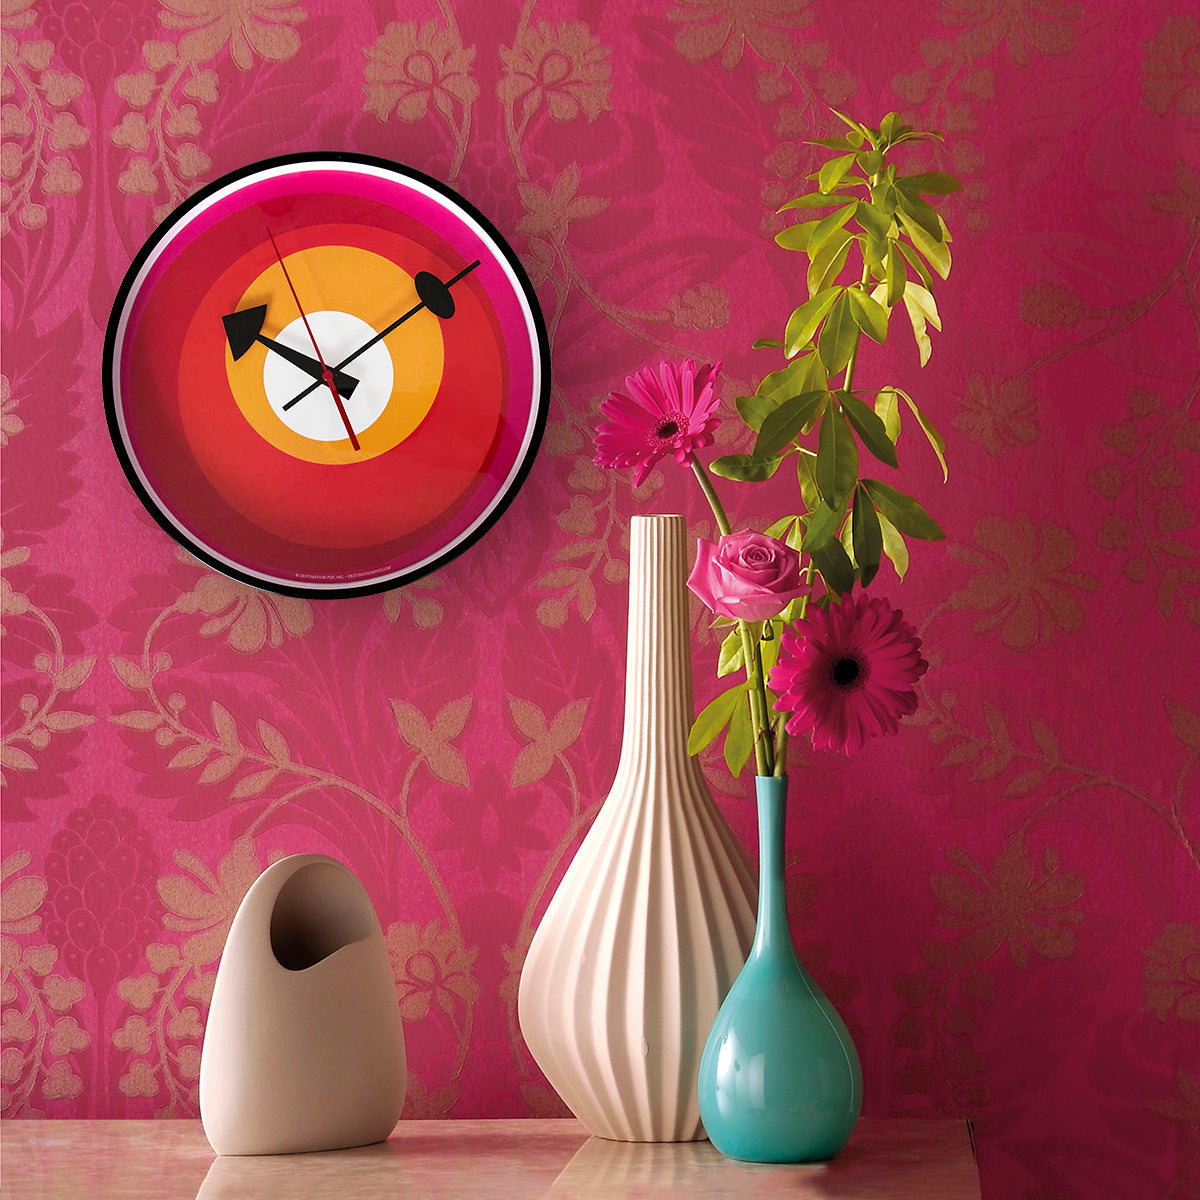 mod wall clock with no numbers but just red, yellow, pink and white circles hanging on a floral pink wall with vases and flowers